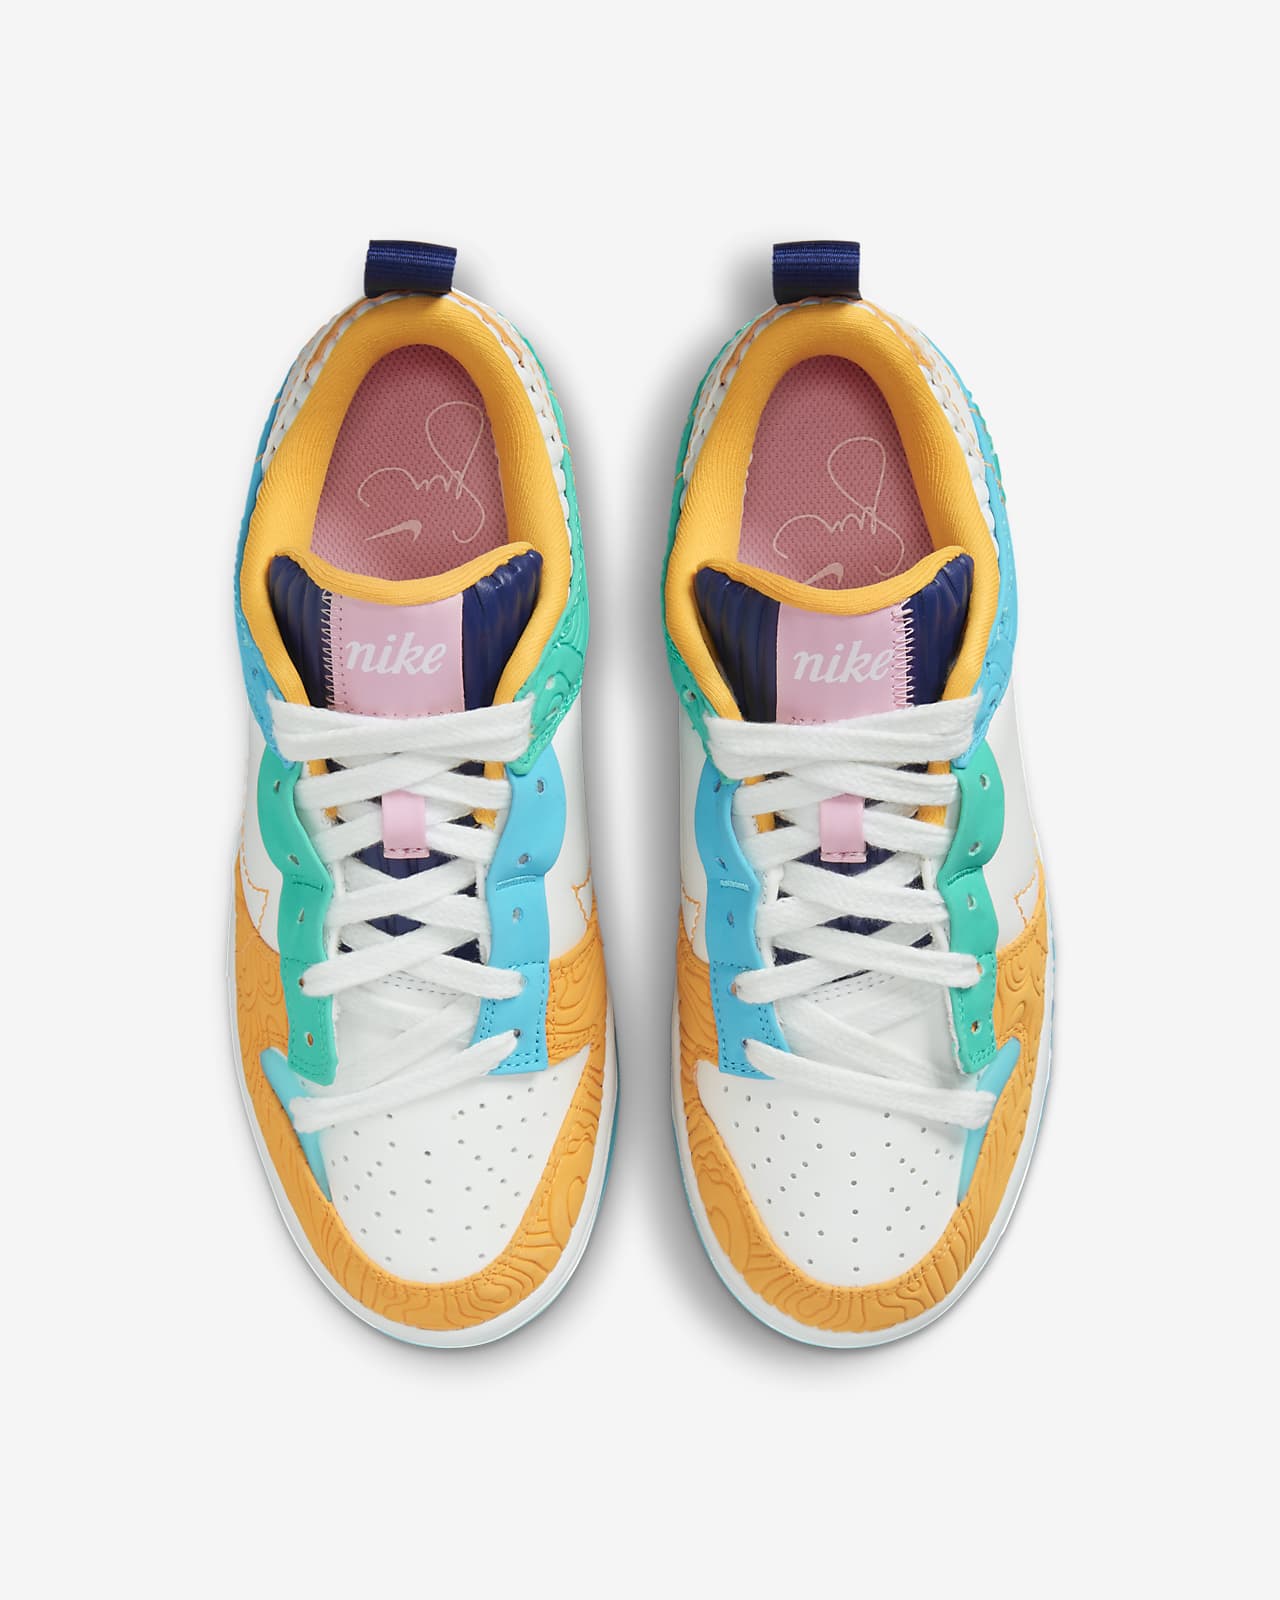 Nike Dunk Low Premium Collection Royale Serena Williams (Women's)